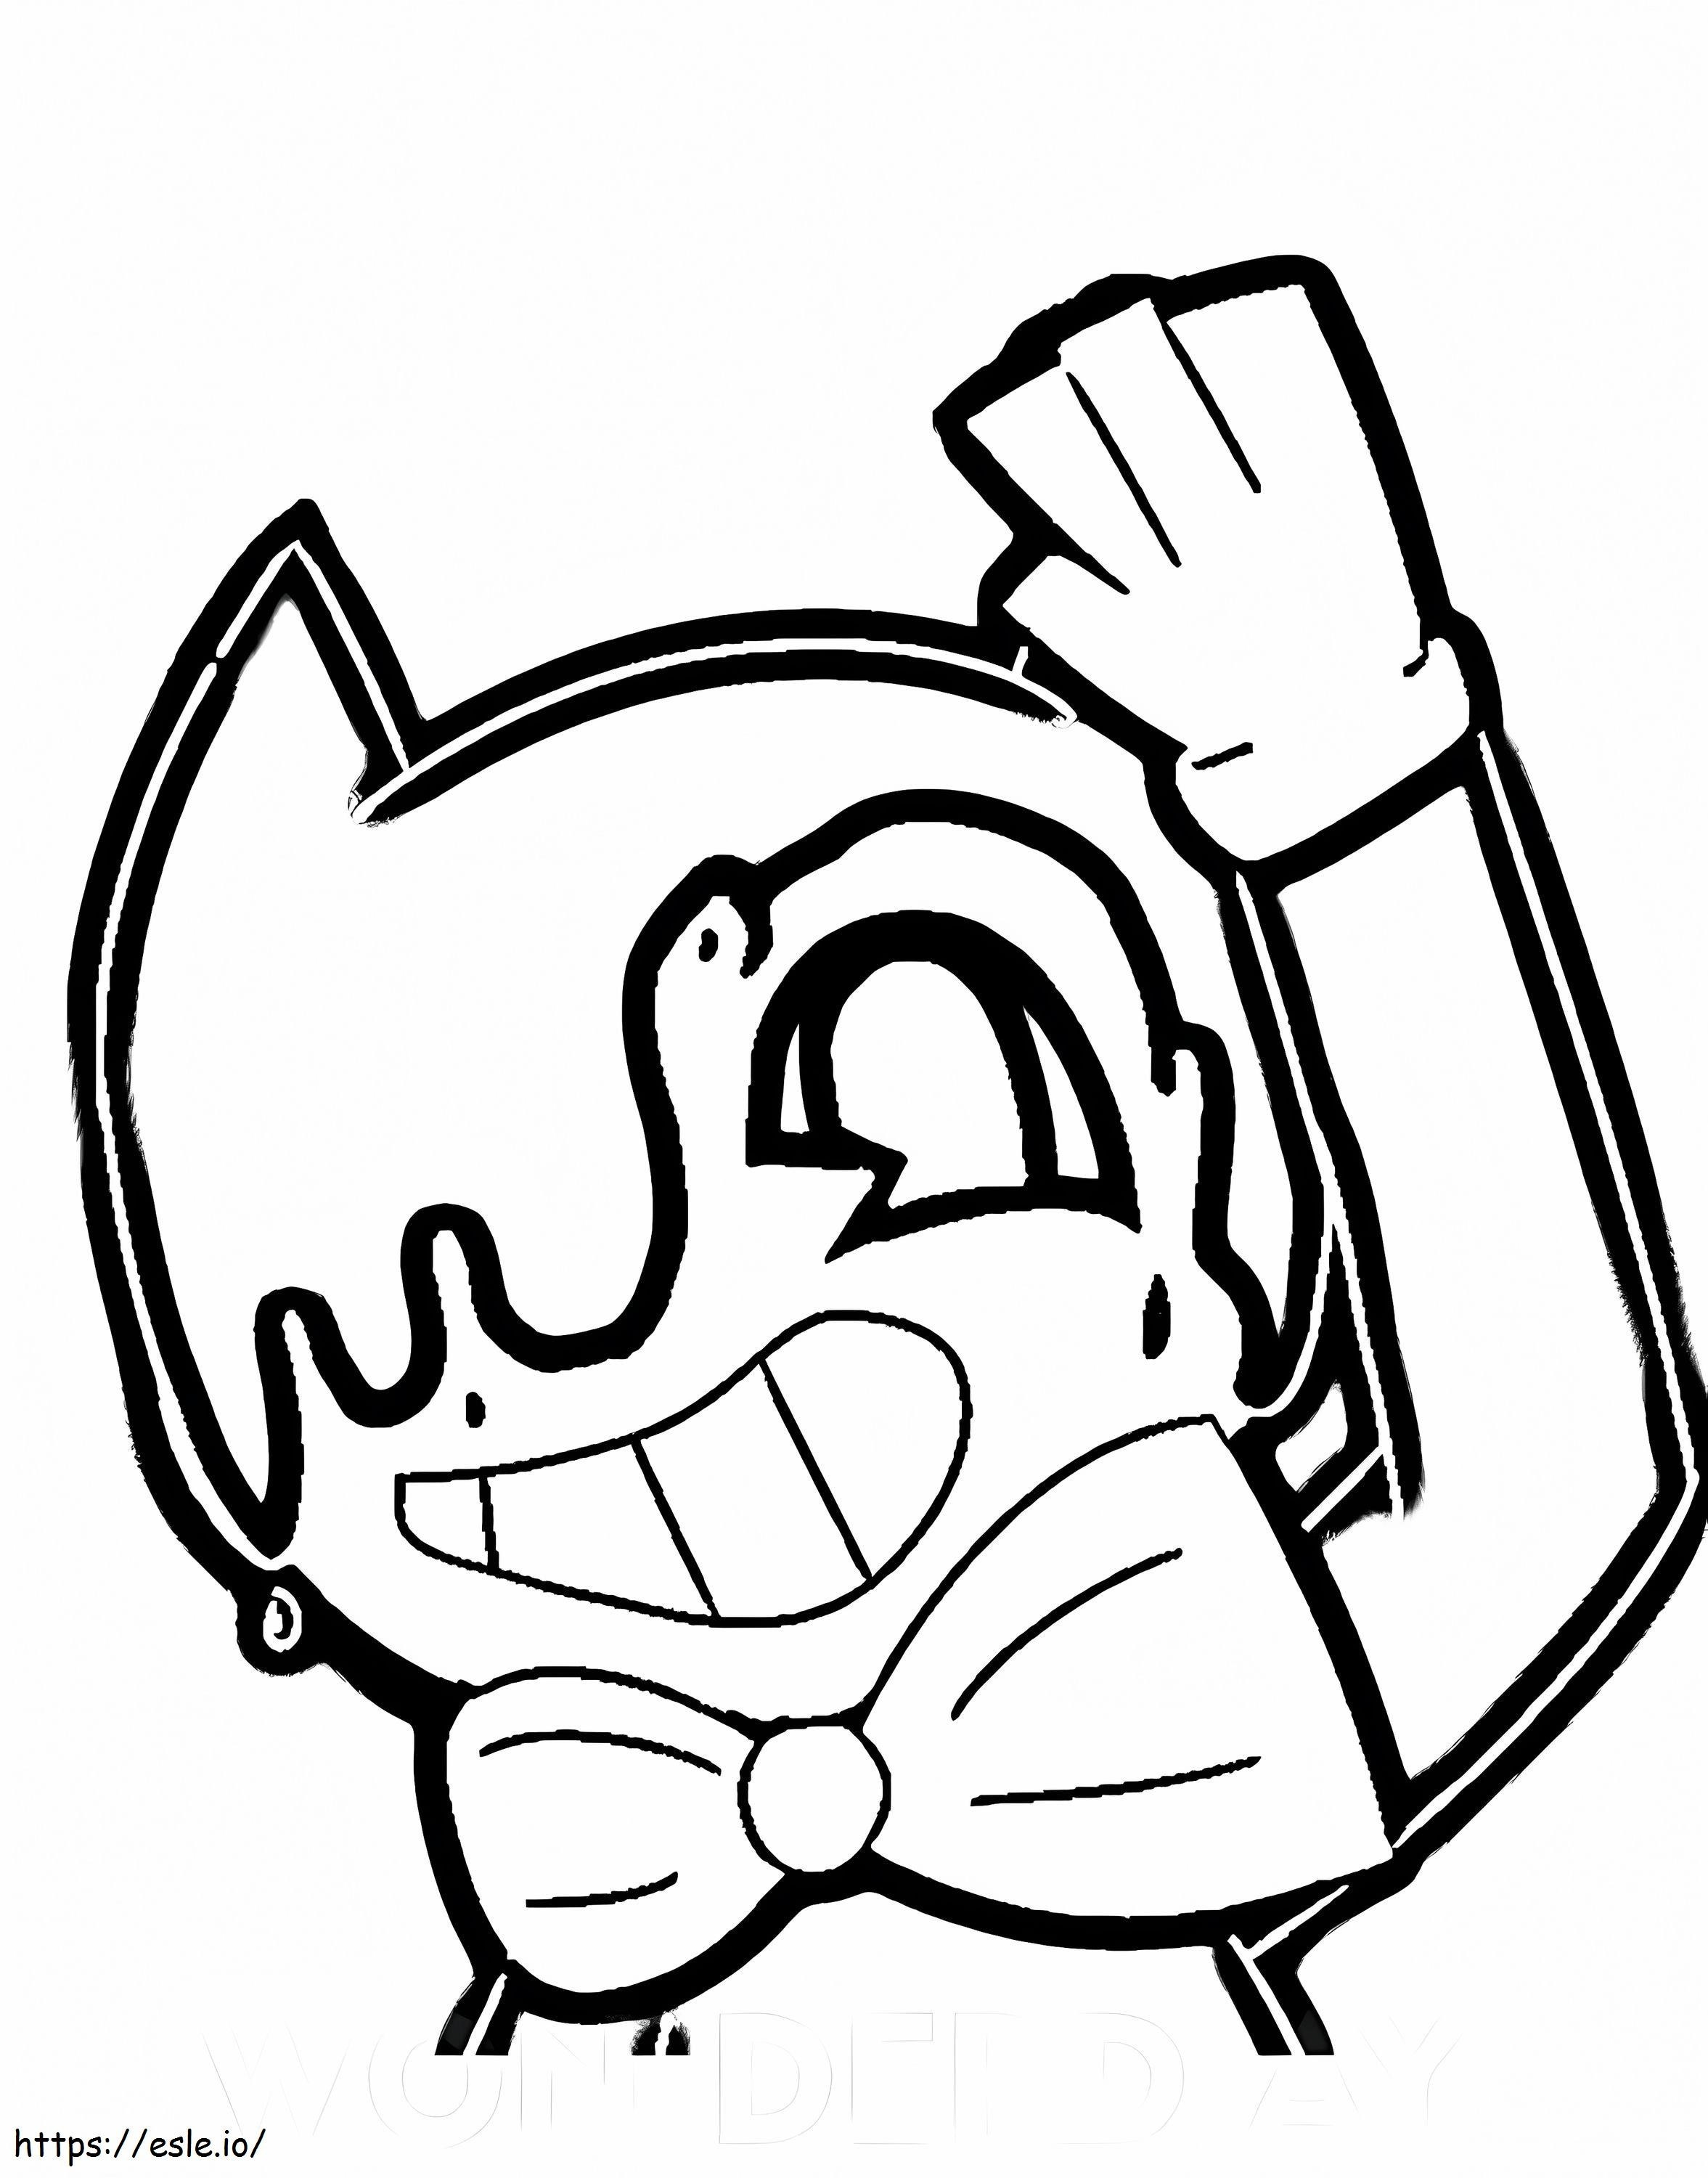 Bendy Waving Hand coloring page